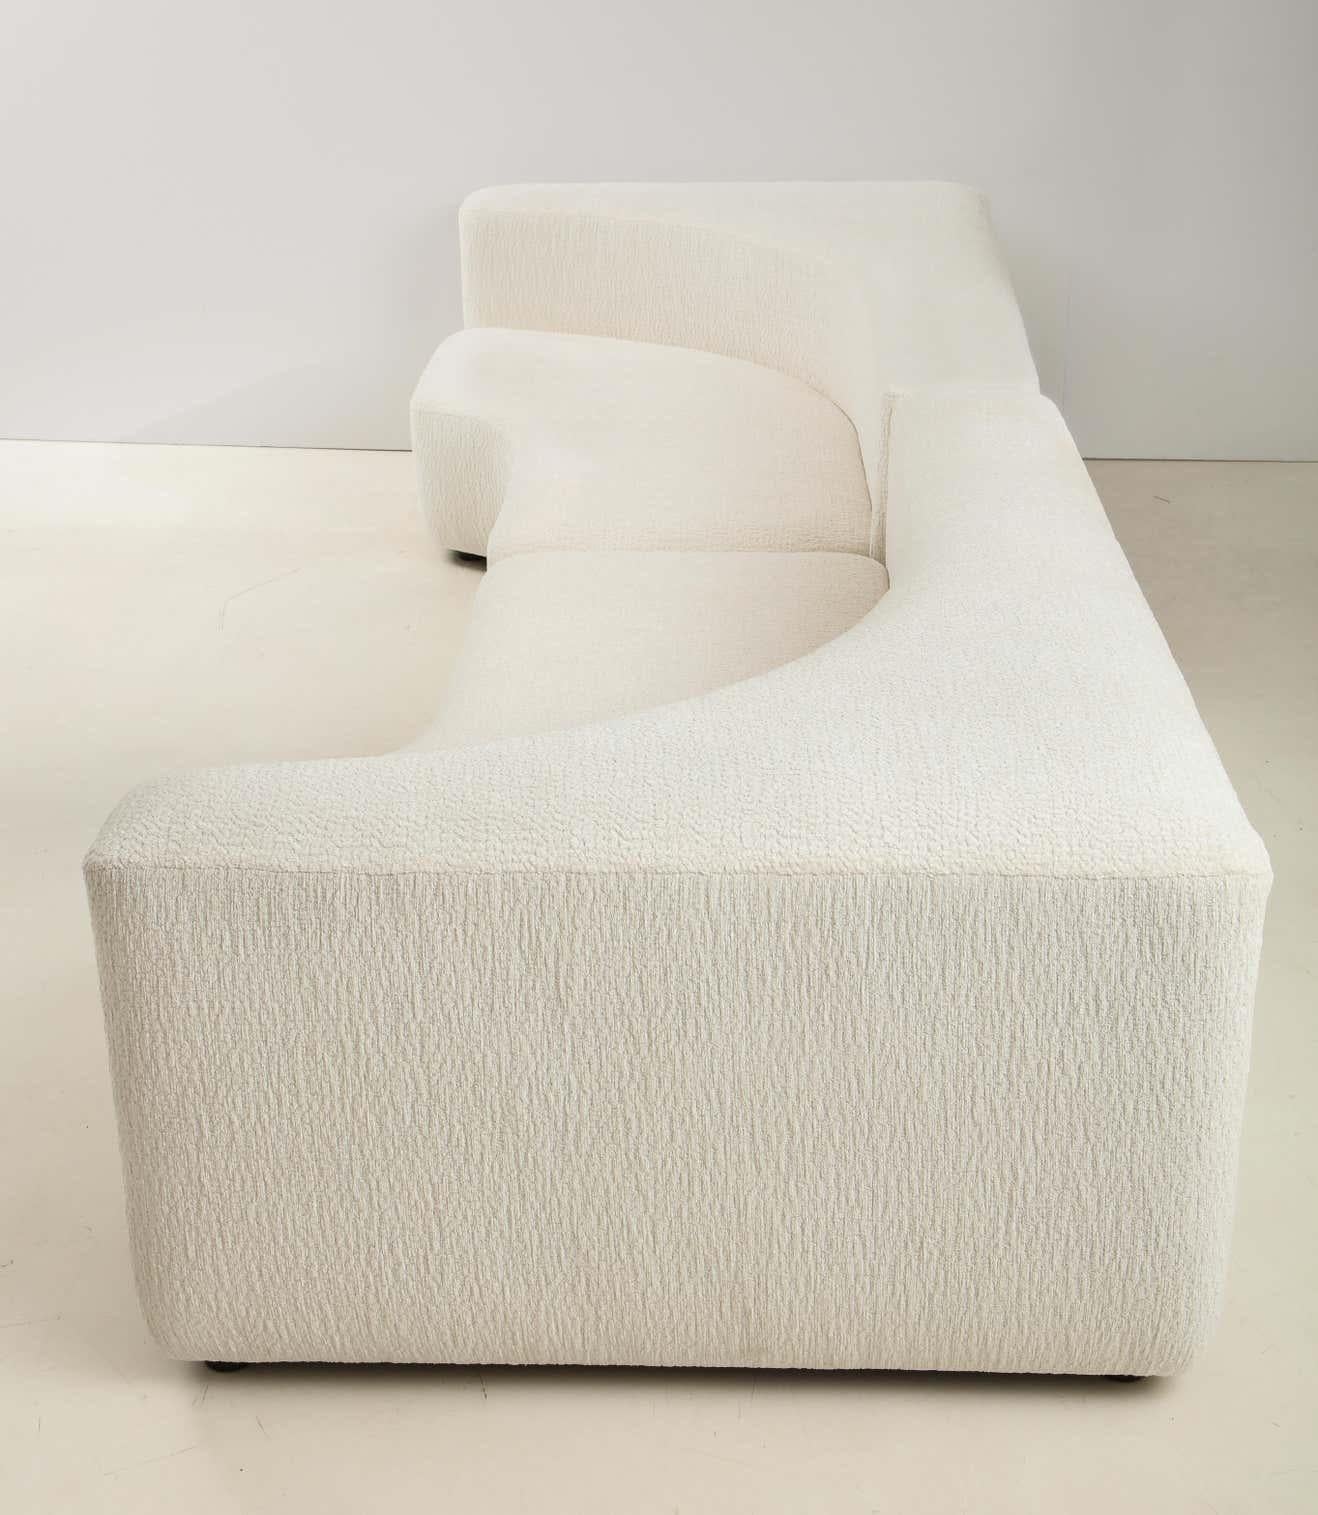 Mid-20th Century Ivory Boucle Sofa Attributed to Pamio, Massari & Toso for Stillwood, Italy, 1960